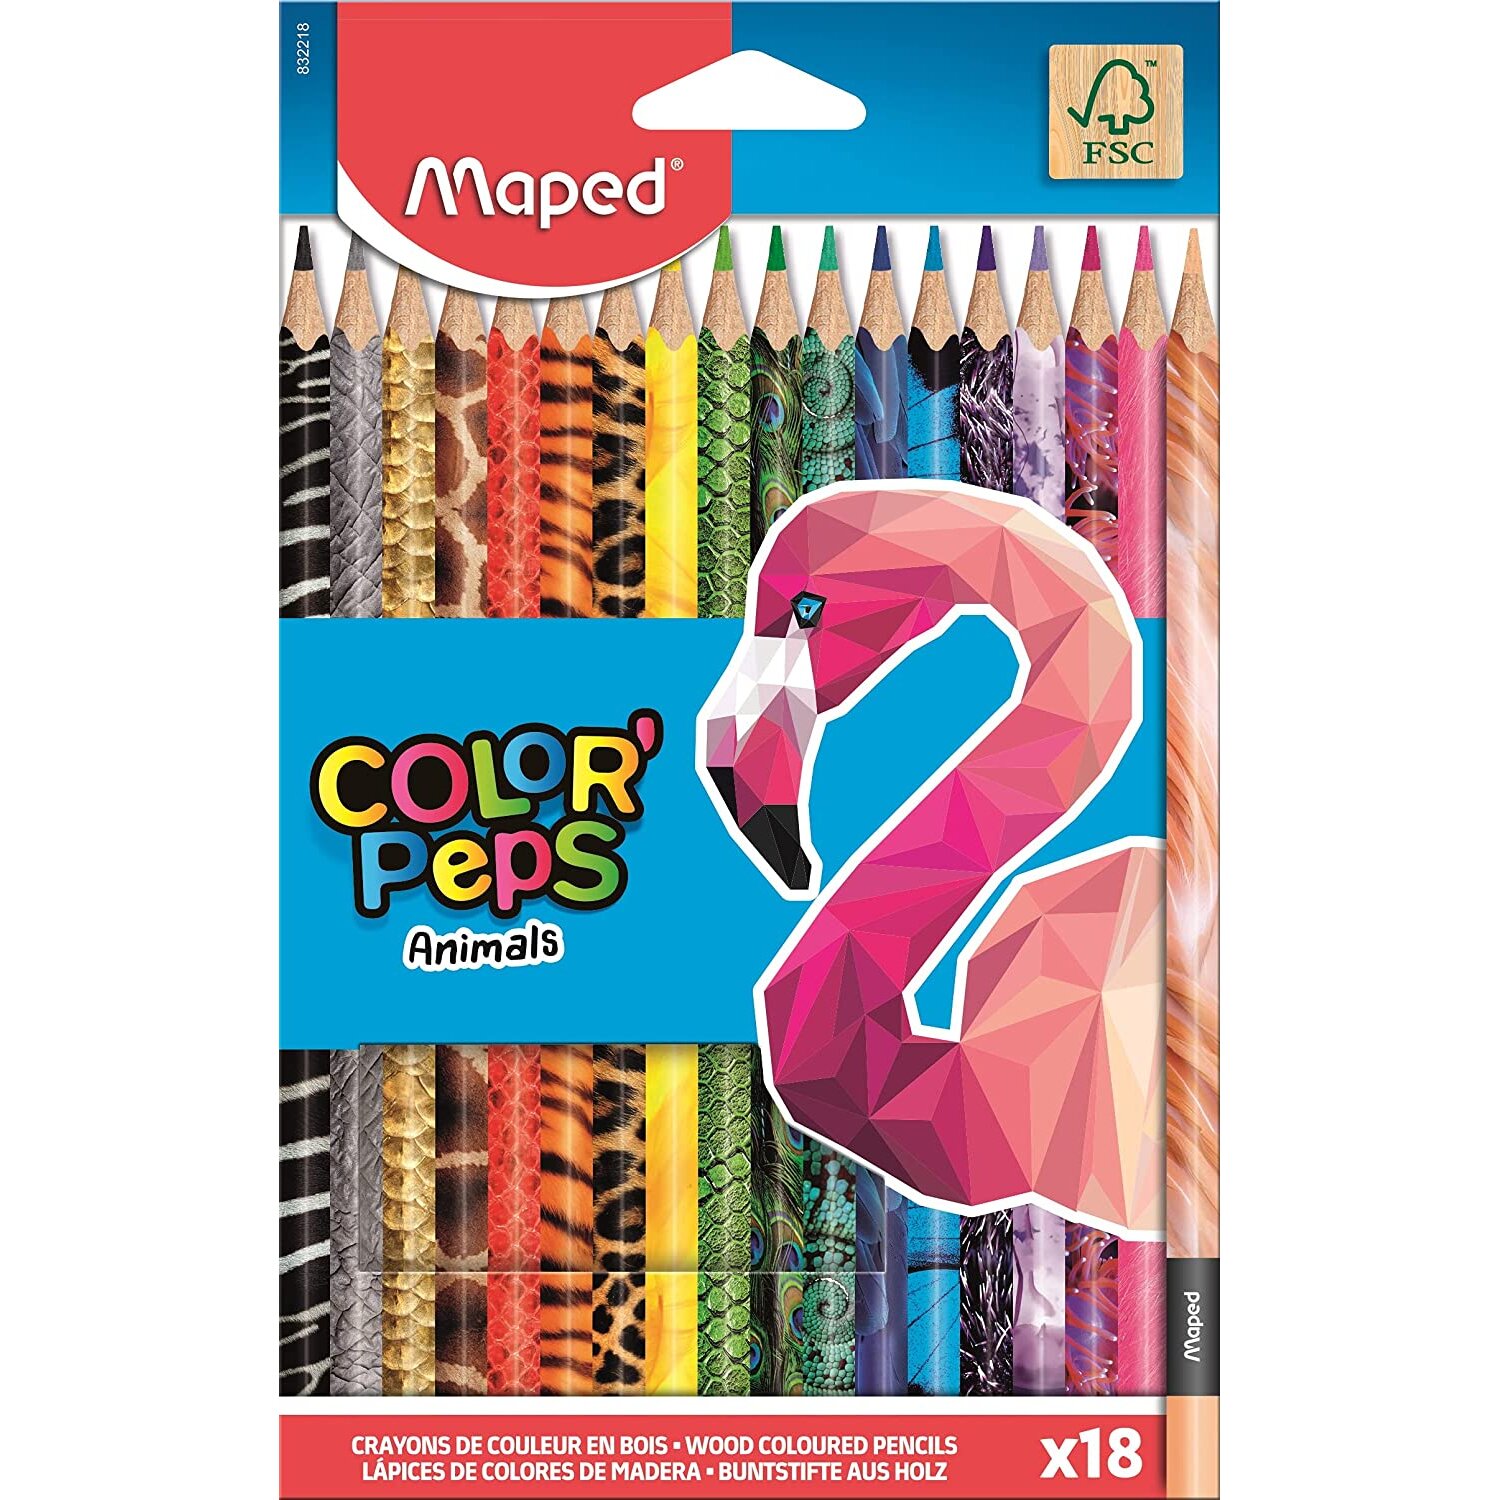 Maped Colour'Peps Animals Colouring Pencils - Ergonomic Triangular Pencil with Bright Colours - Complies with Toy Regulations - Pack of 18 Wooden